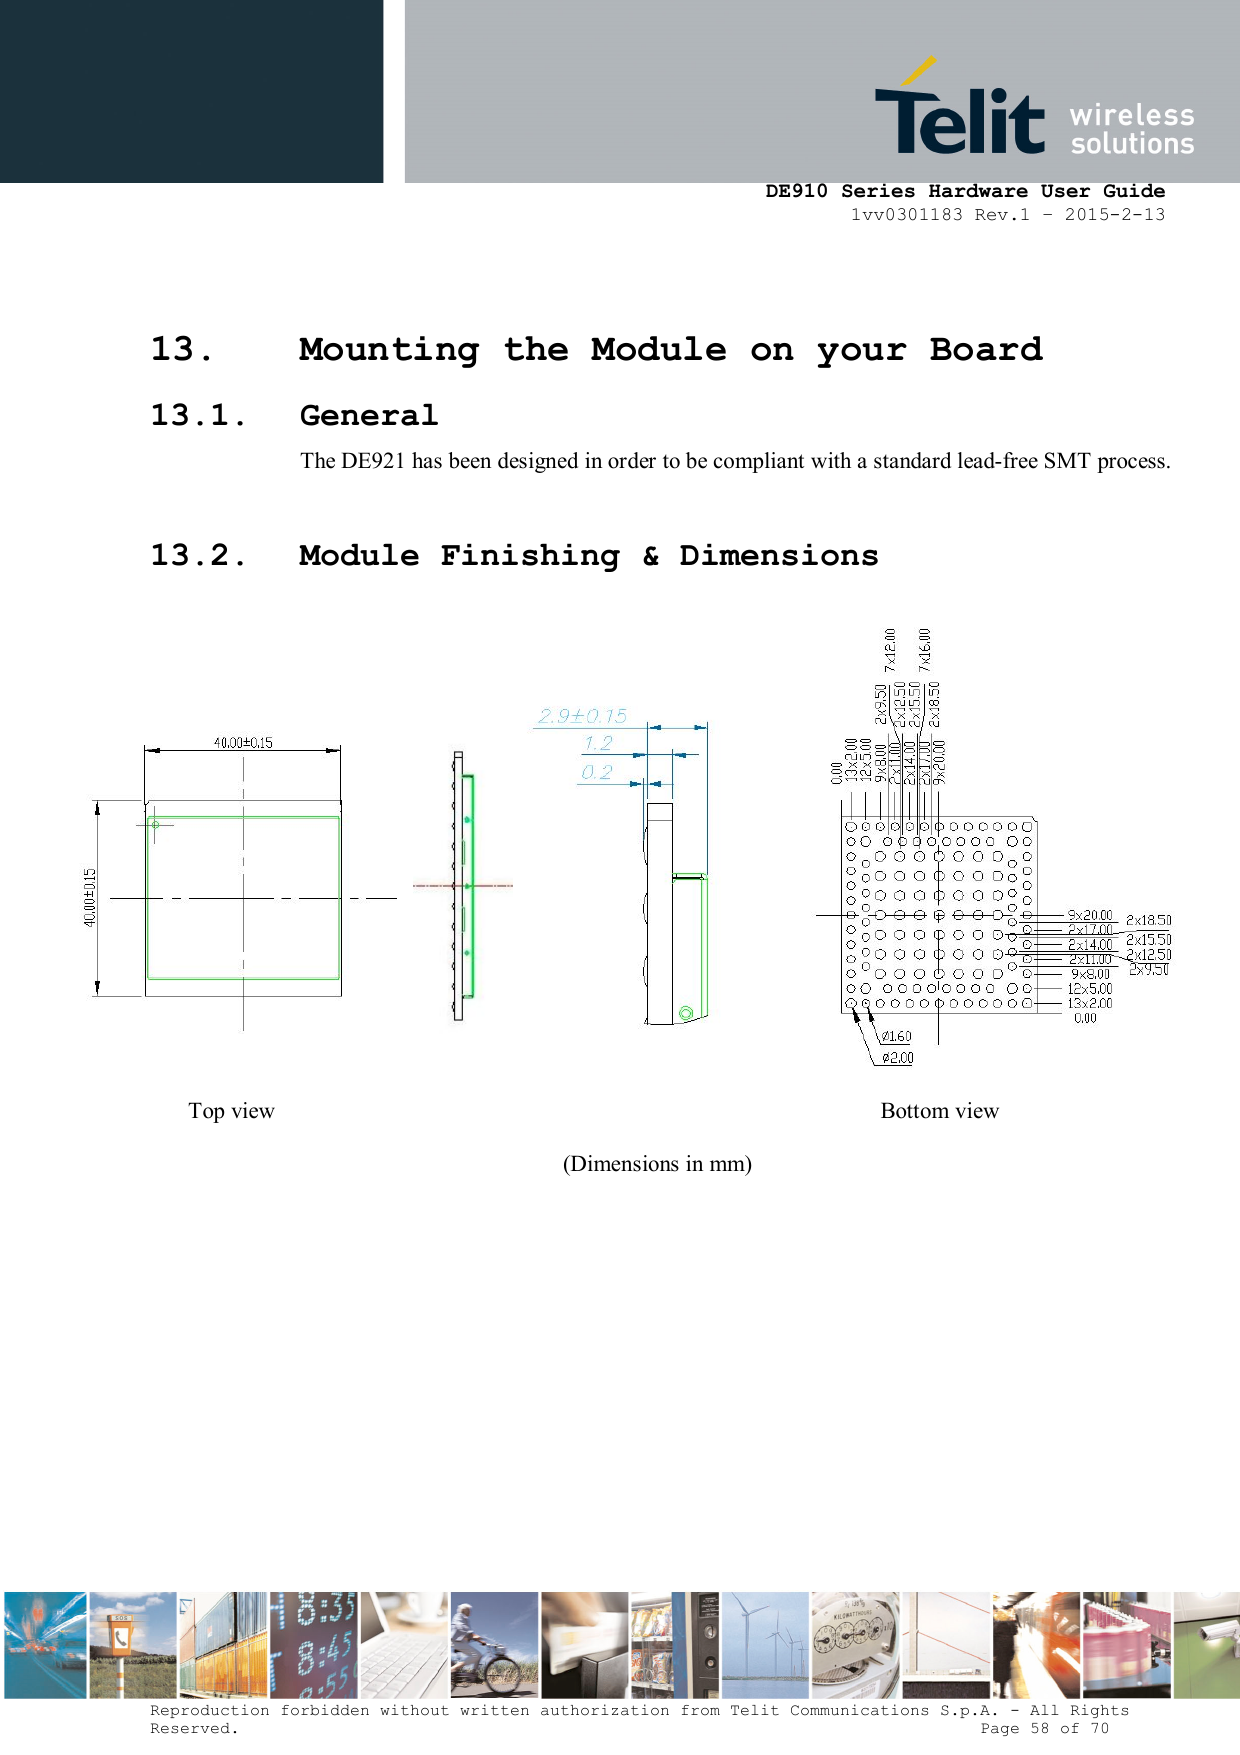      DE910 Series Hardware User Guide 1vv0301183 Rev.1 – 2015-2-13 Reproduction forbidden without written authorization from Telit Communications S.p.A. - All Rights Reserved.                                                                          Page 58 of 70 13. Mounting the Module on your Board 13.1. General The DE921 has been designed in order to be compliant with a standard lead-free SMT process.  13.2. Module Finishing &amp; Dimensions        Top view    Bottom view (Dimensions in mm) 